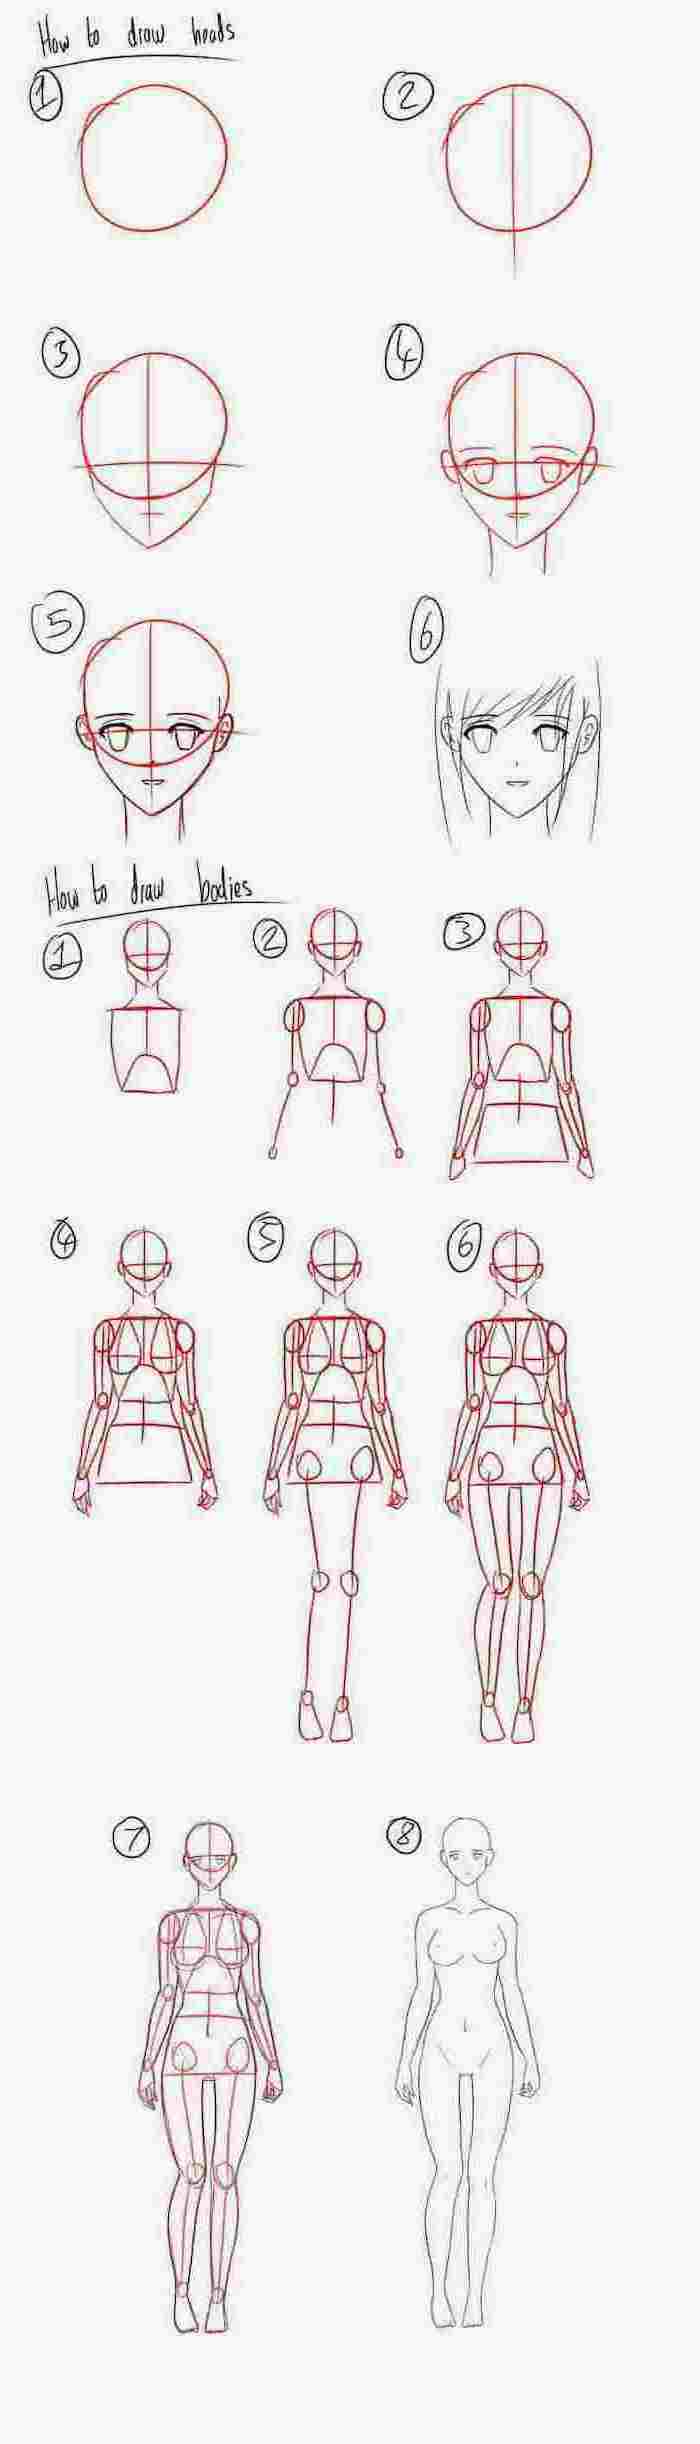 1001 + ideas on how to draw anime tutorials + pictures